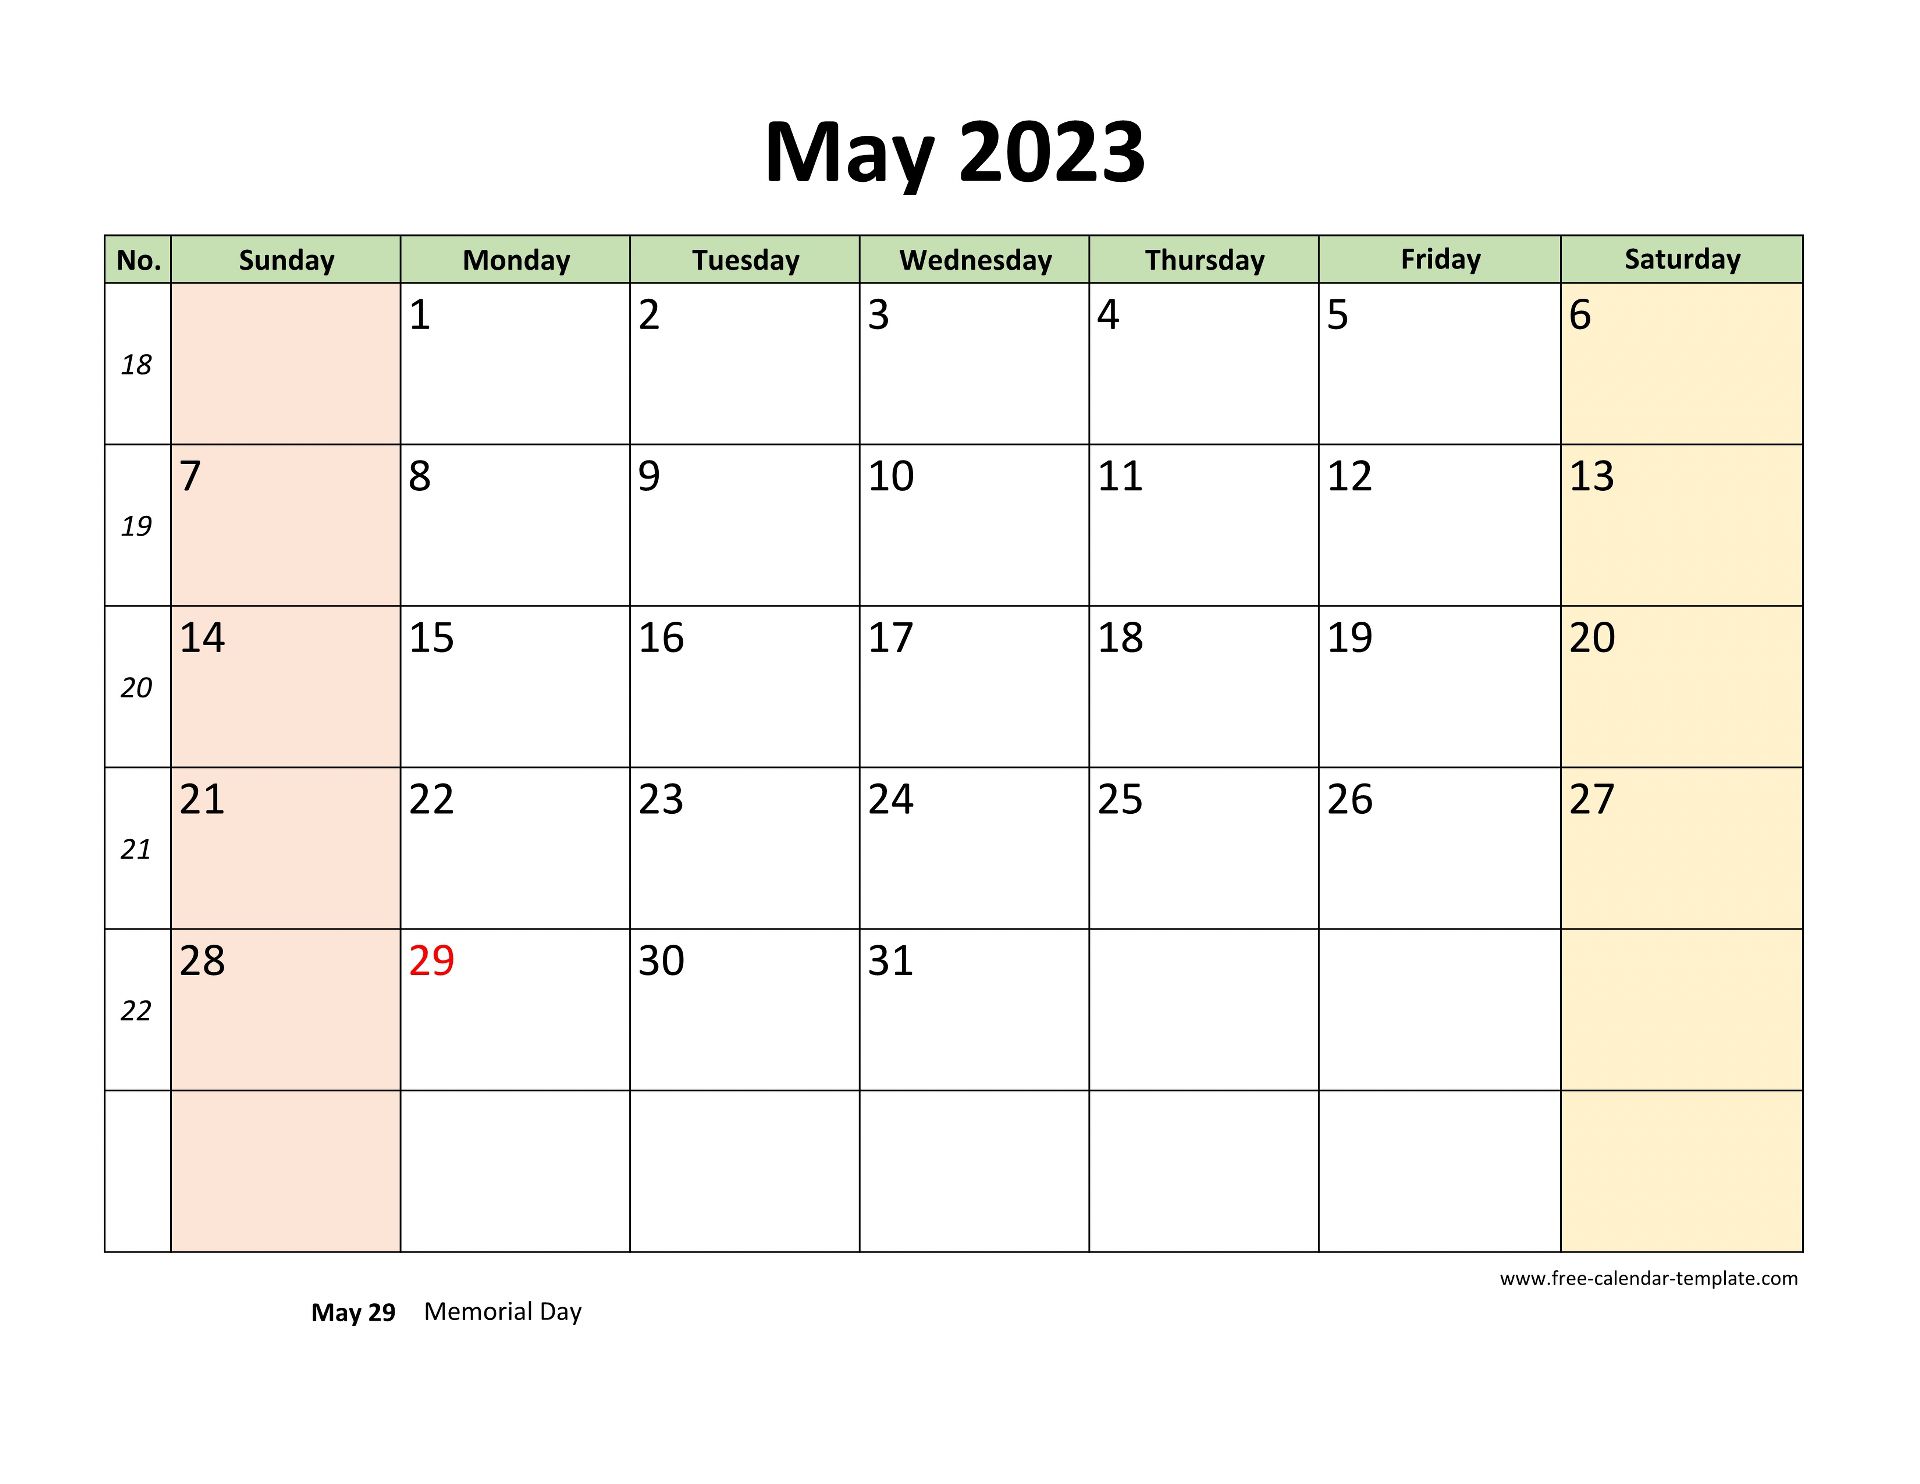 May 2023 Calendar Printable with coloring on weekend (horizontal